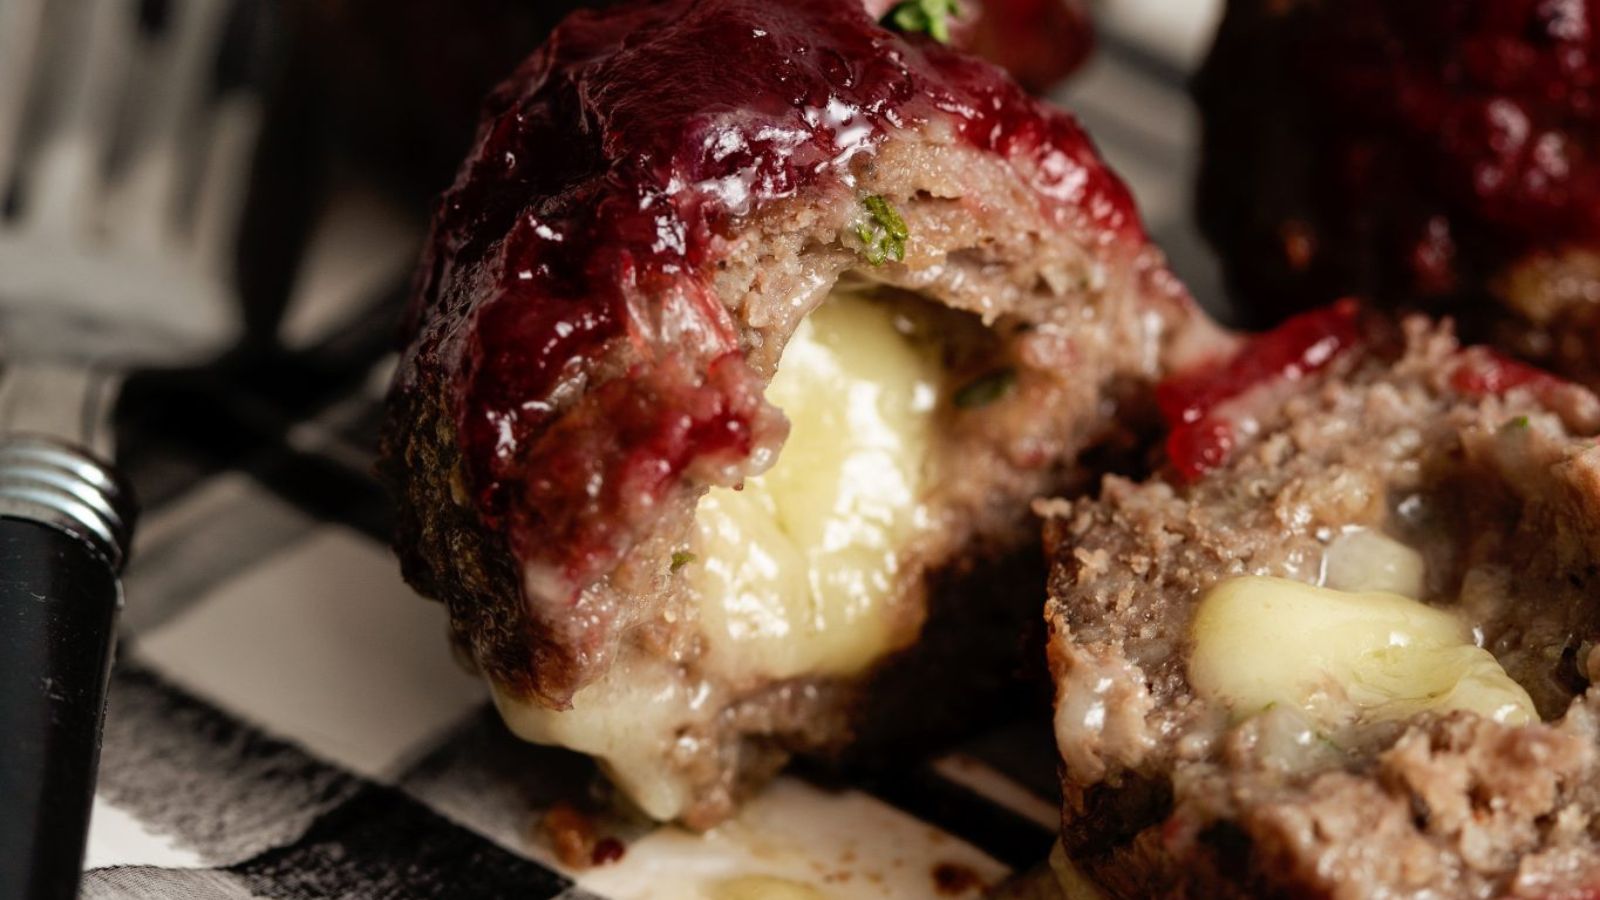 20 Not-So-Regular, Yummy Meatball Recipes Your Kids Will Love